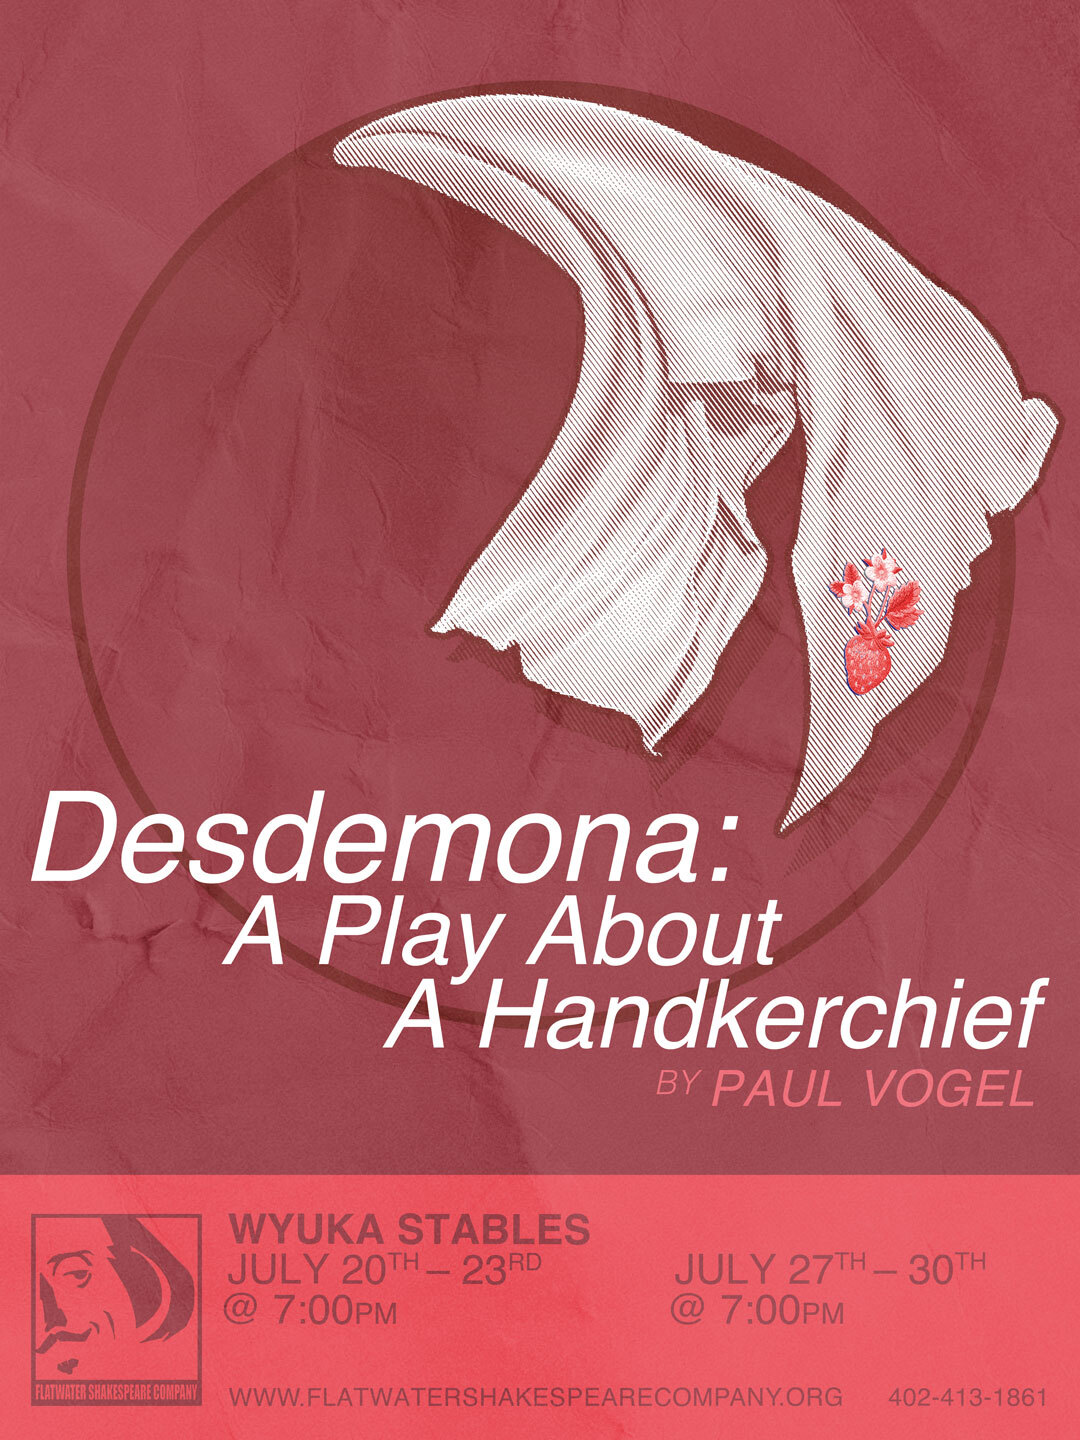 7/28 ADU - ADULT: Friday. July 28, 2023 | 7:00 p.m. - 10:00 p.m. CST | Wyuka Stables (Desdemona: A Play about a Handkerchief)